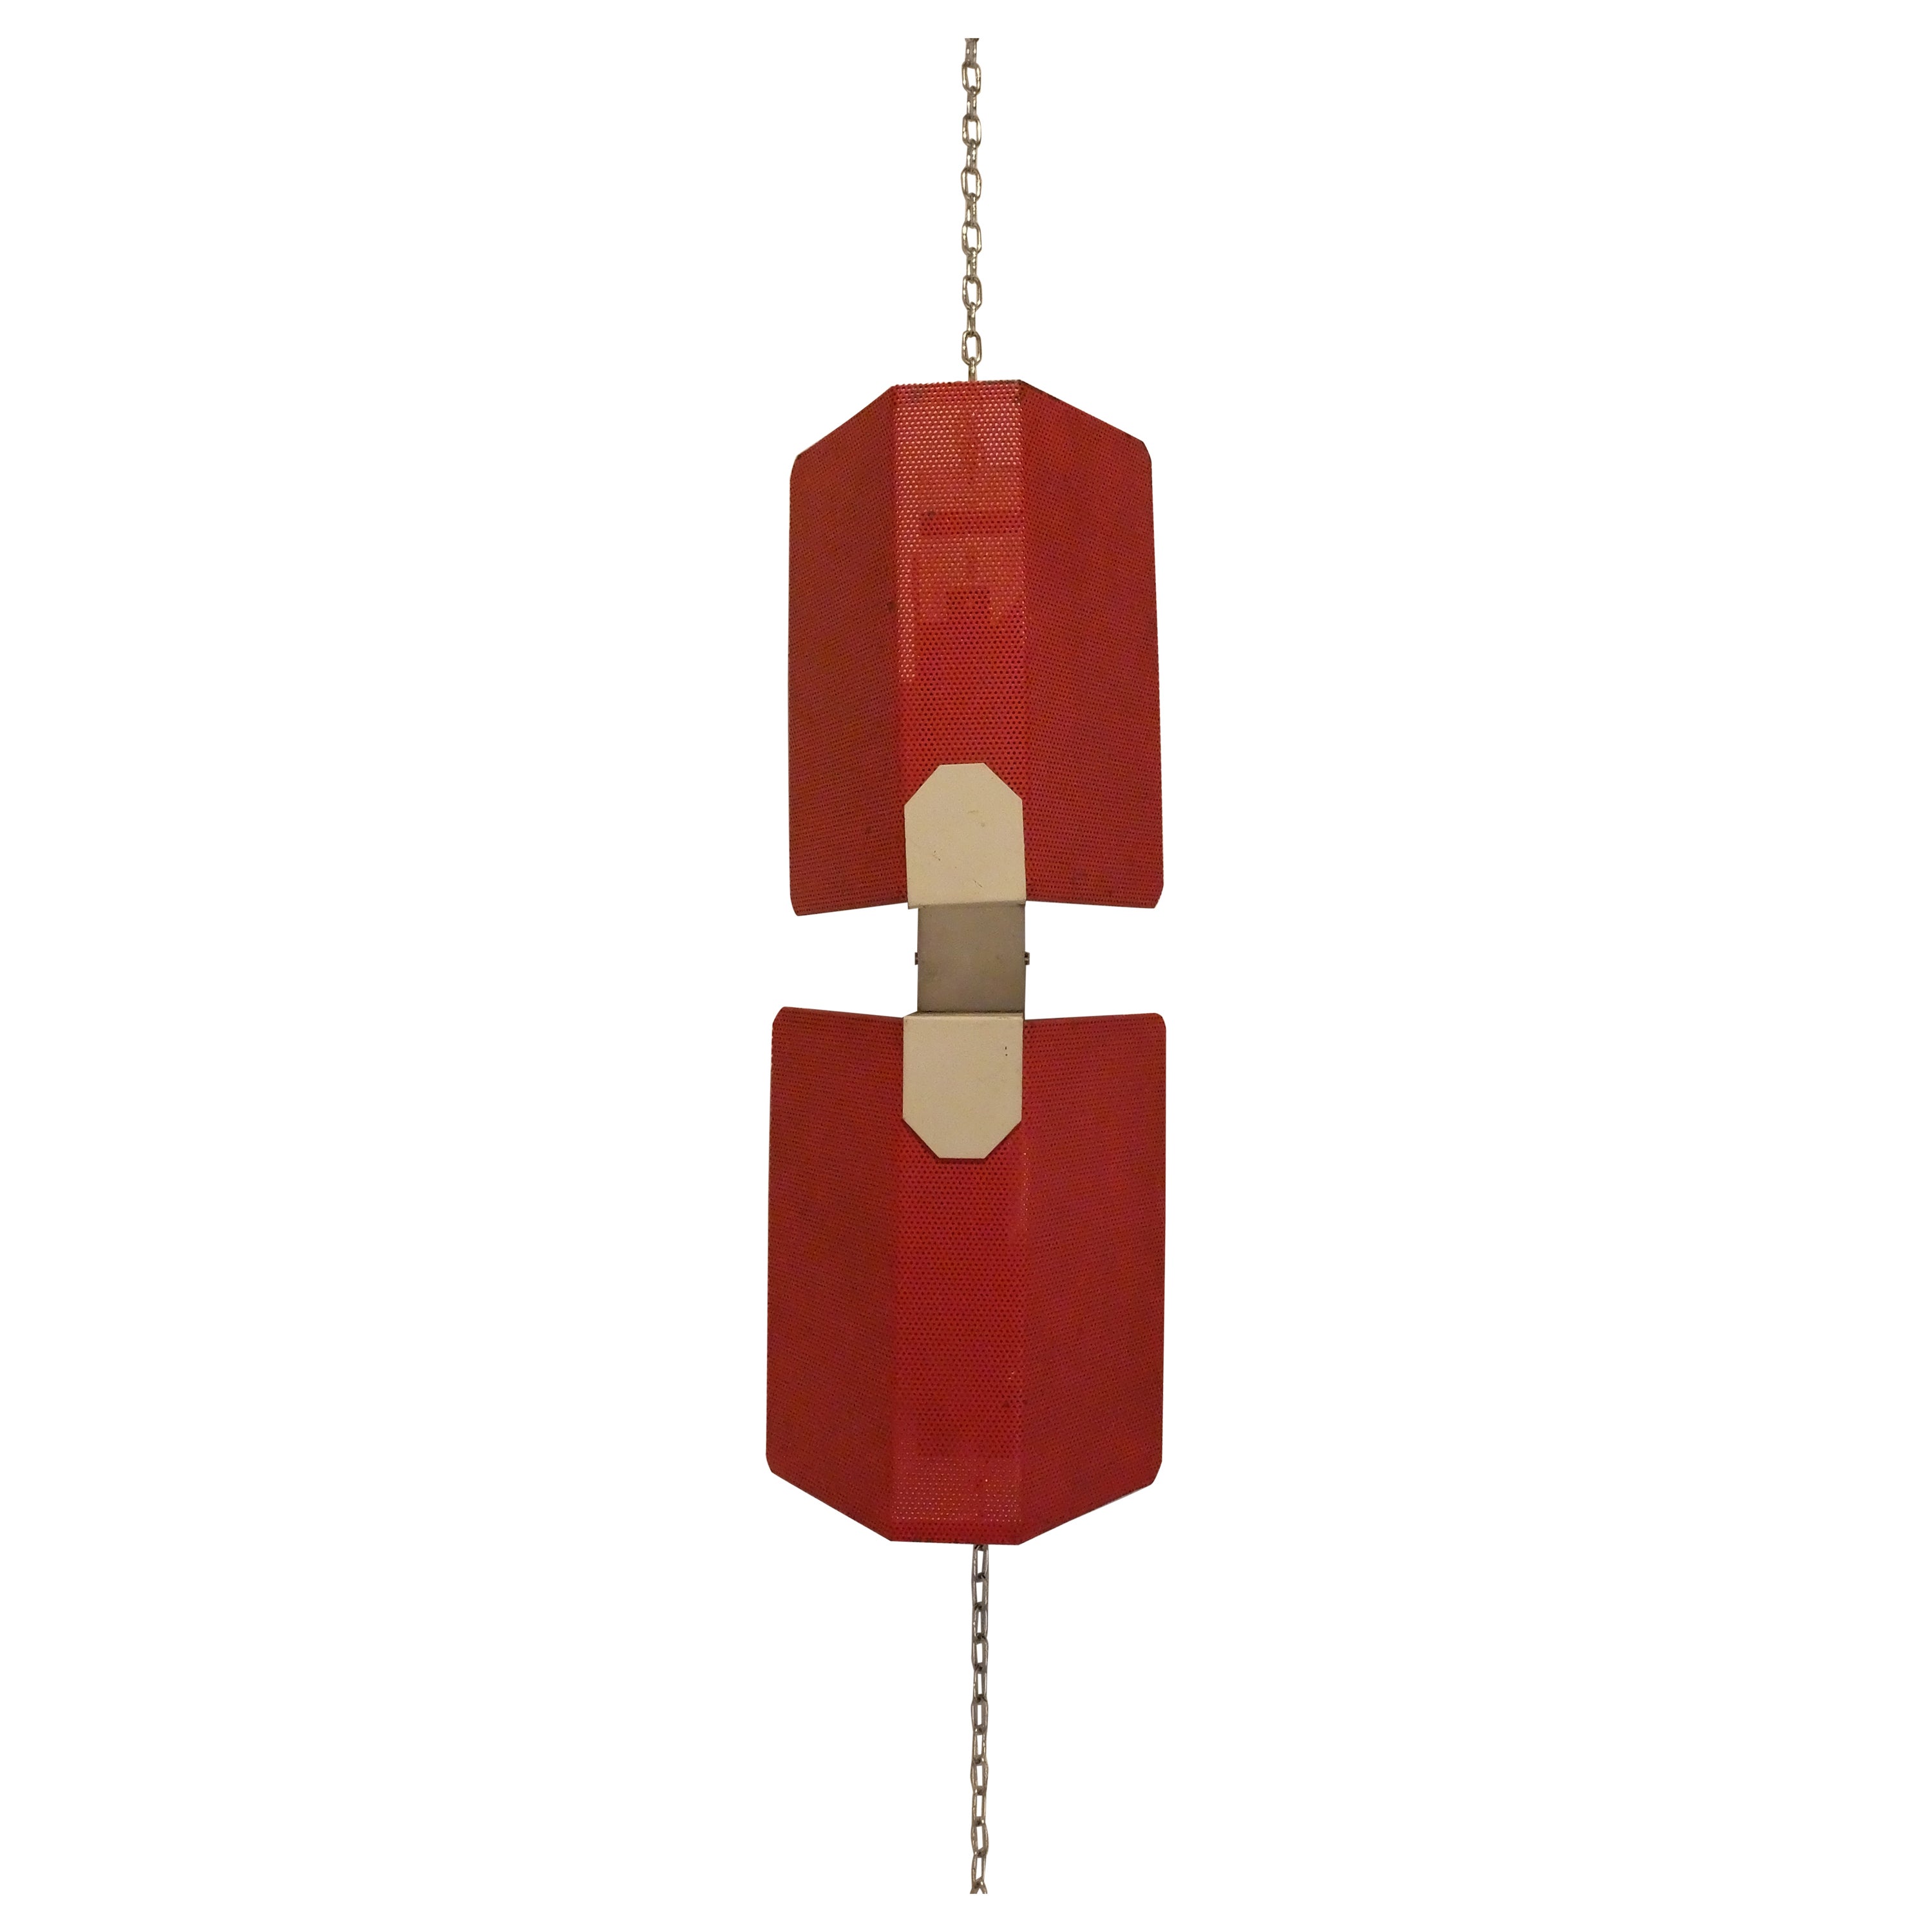 French Mid-Century Modern, Pair of Red Metal Appliques by Mathieu Matégot, 1950s For Sale